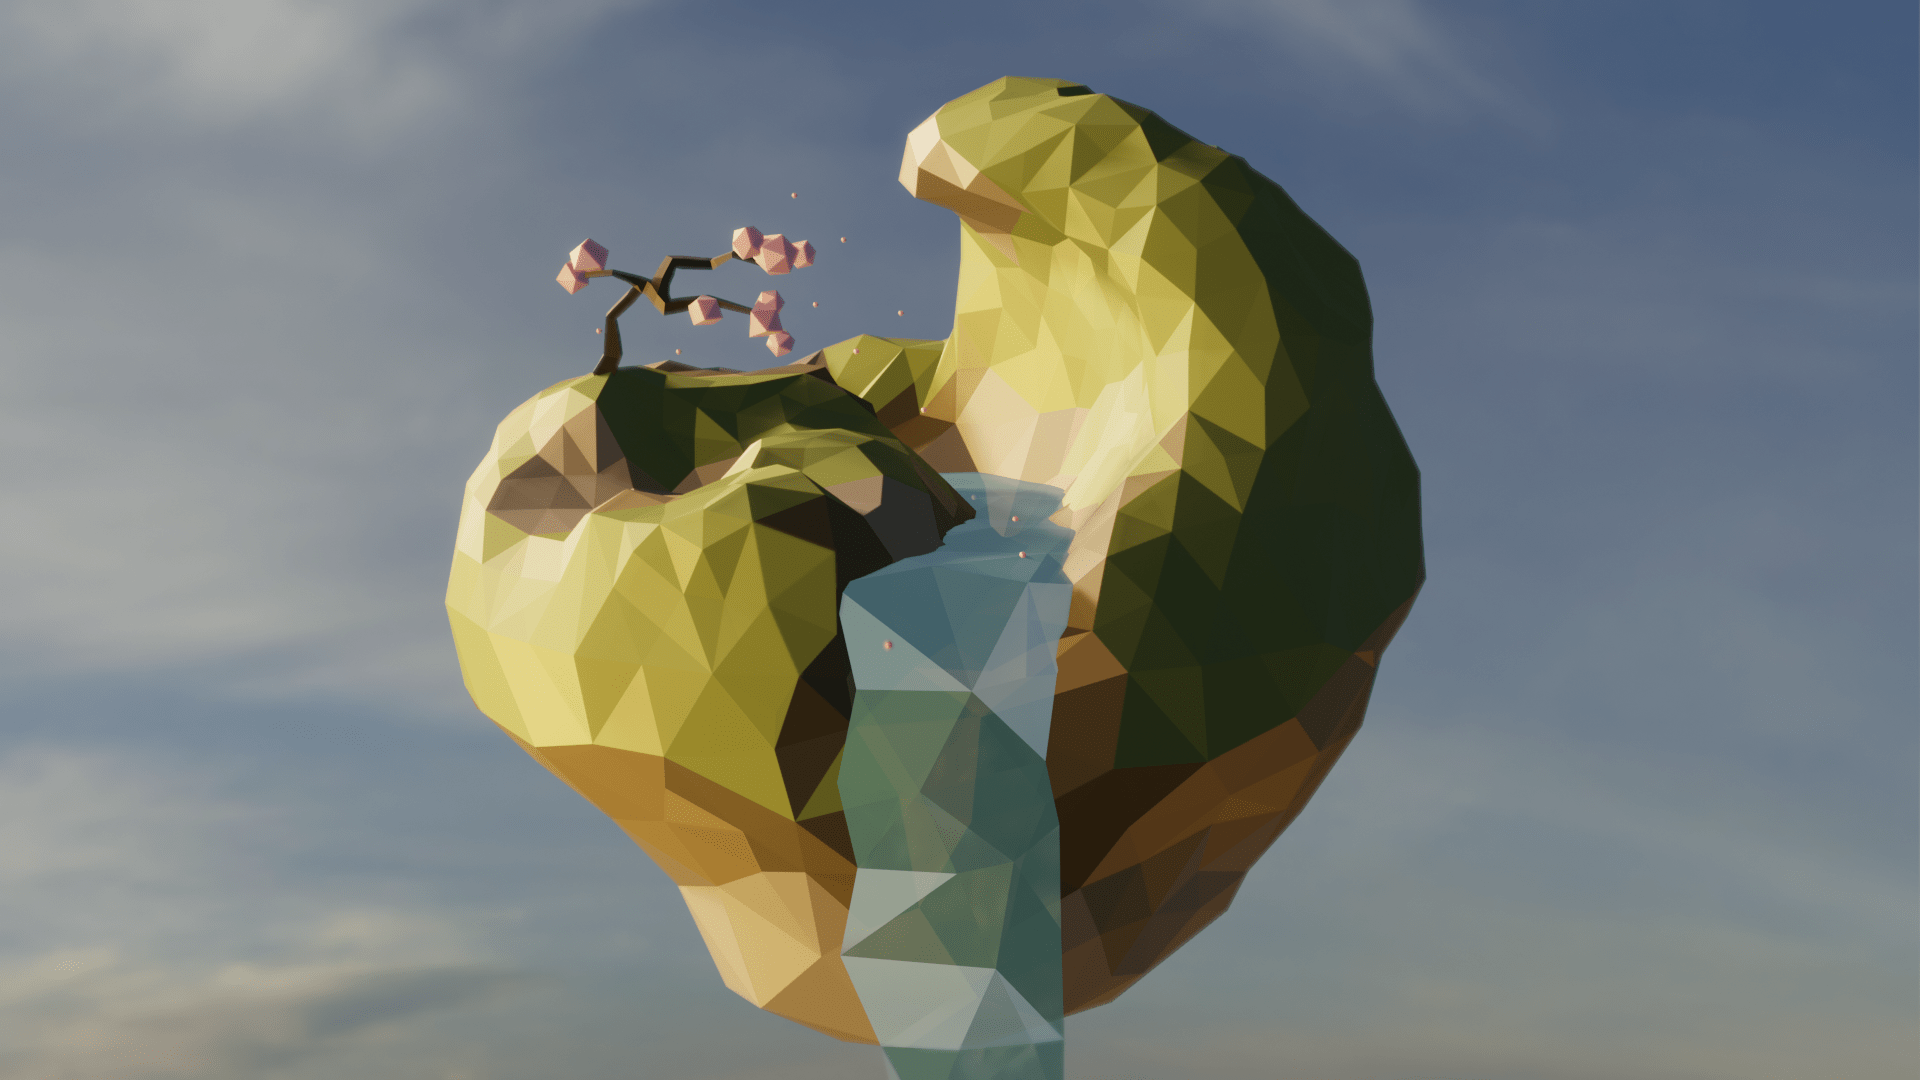 I watched the Low Poly Island tutorial and tried to make one on my own